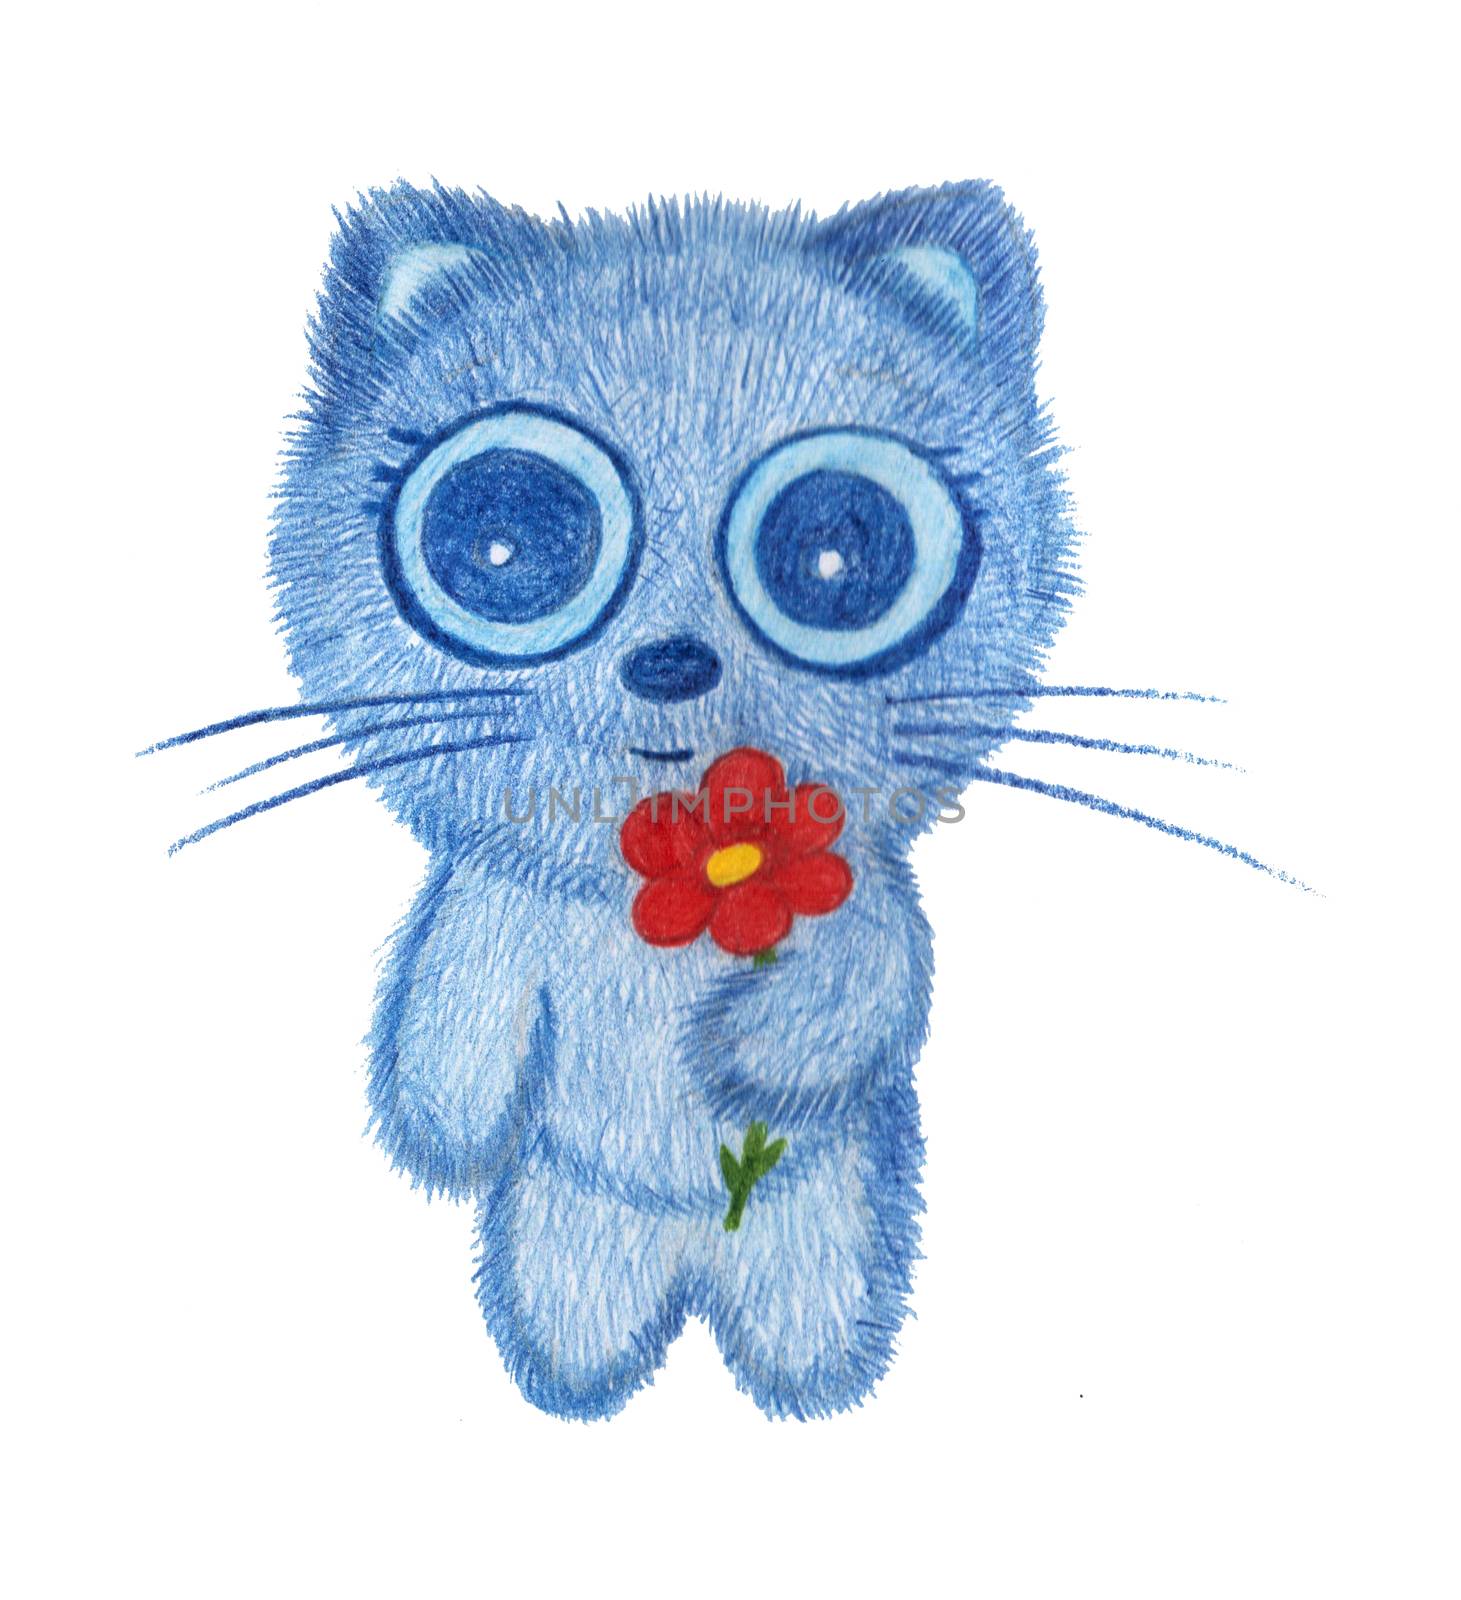 Cat with red flower drawn with colored pencils. Hand-drawn cute kid illustration. Card with blue cat with big eyes on white background for prints.